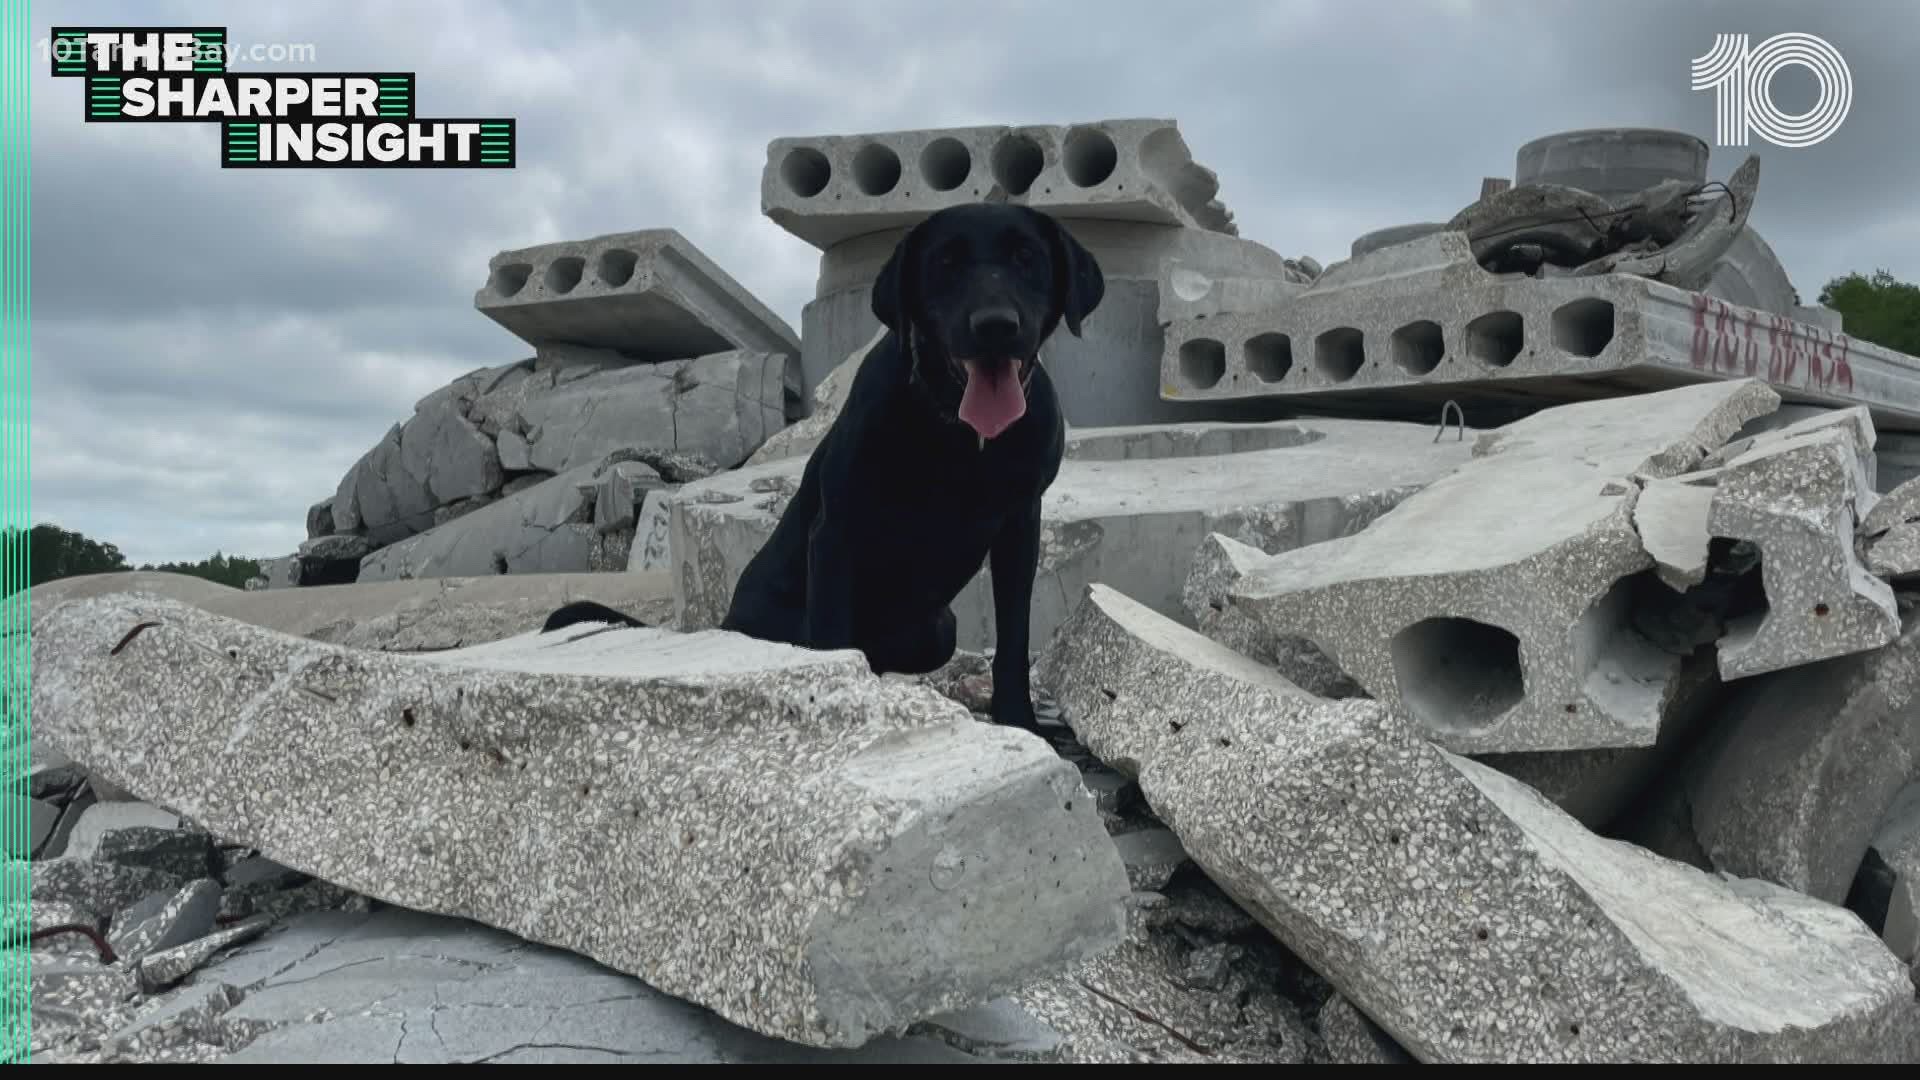 As the search continues in Surfside for survivors of a condo collapse, Patron's handler explains how search dogs enable success to find people.